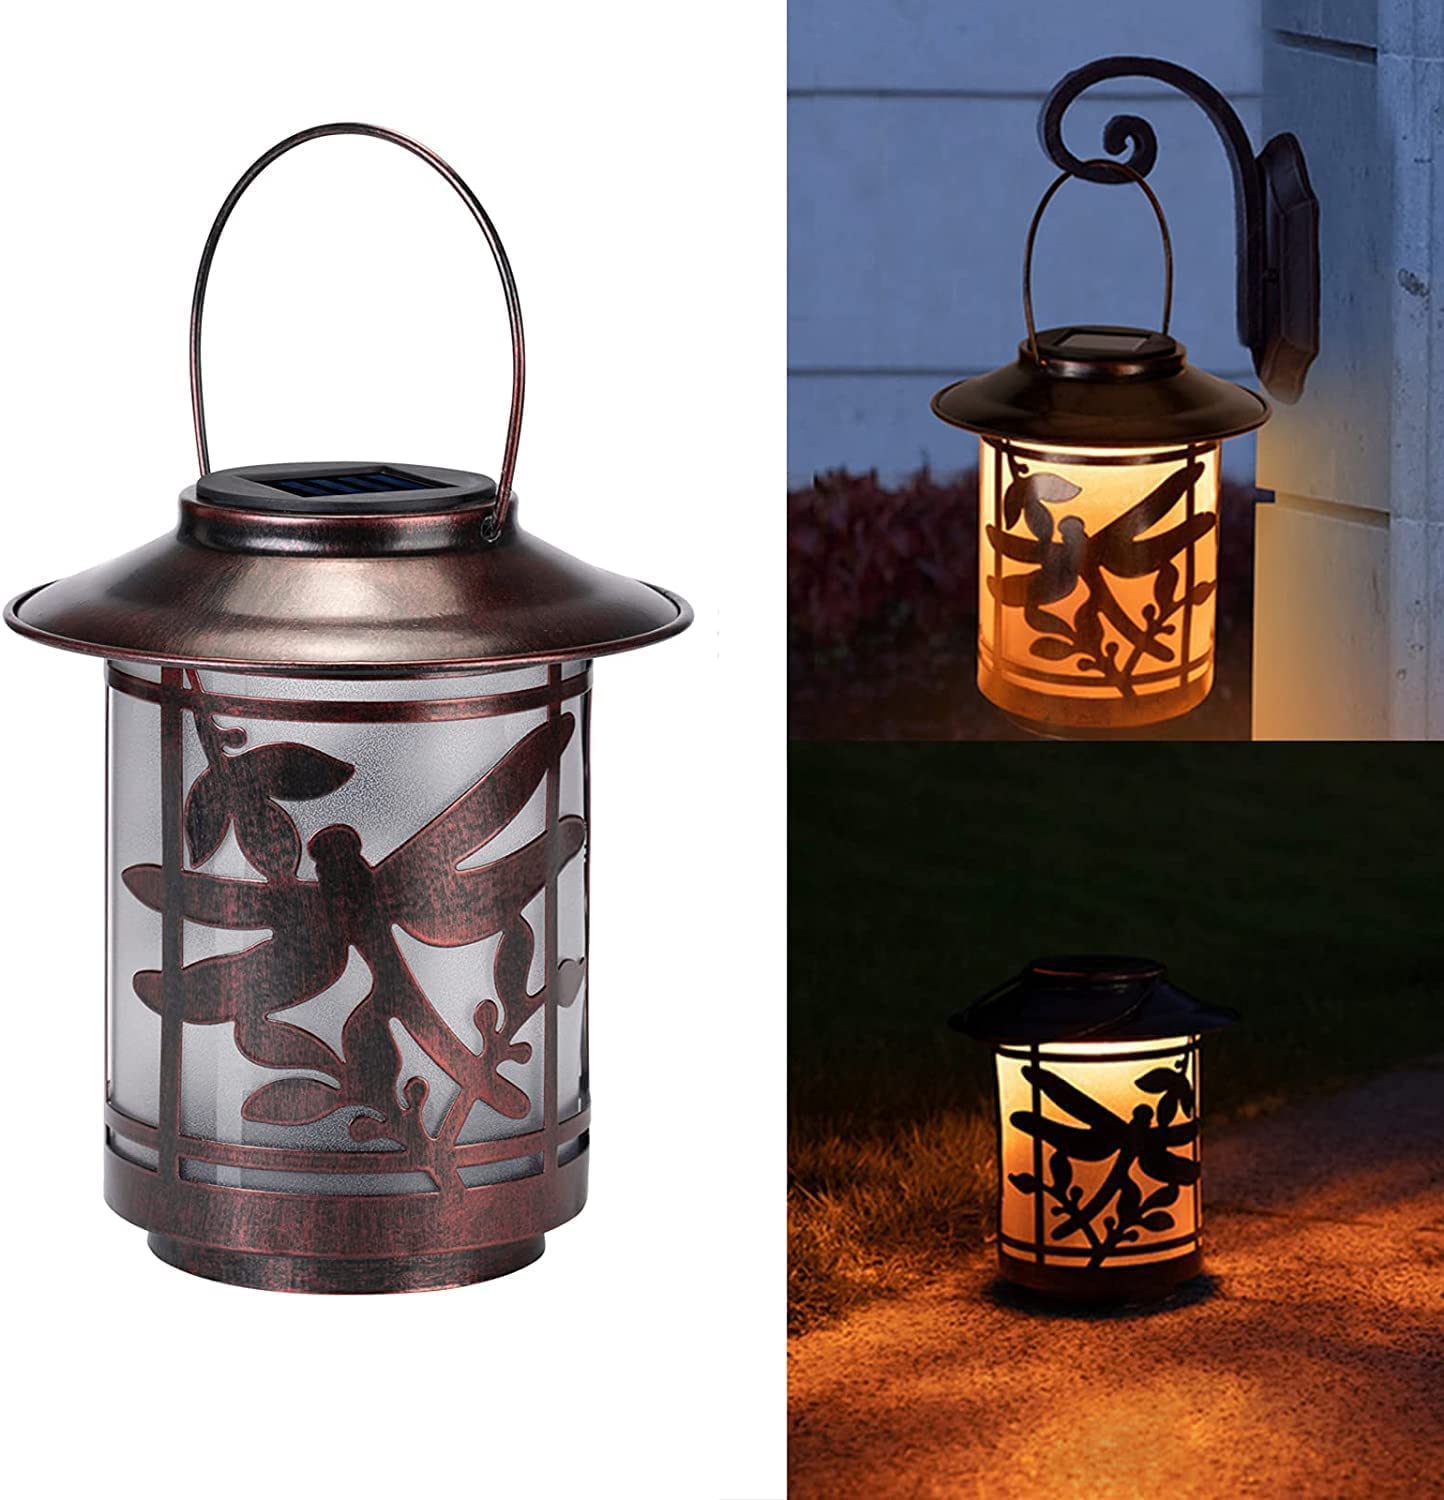 Solar Lantern Lights Outdoor, Dragonfly Waterproof Metal Hanging Solar Lights Decorative for Garden, Patio, Courtyard and Tabletop (Dragonfly)